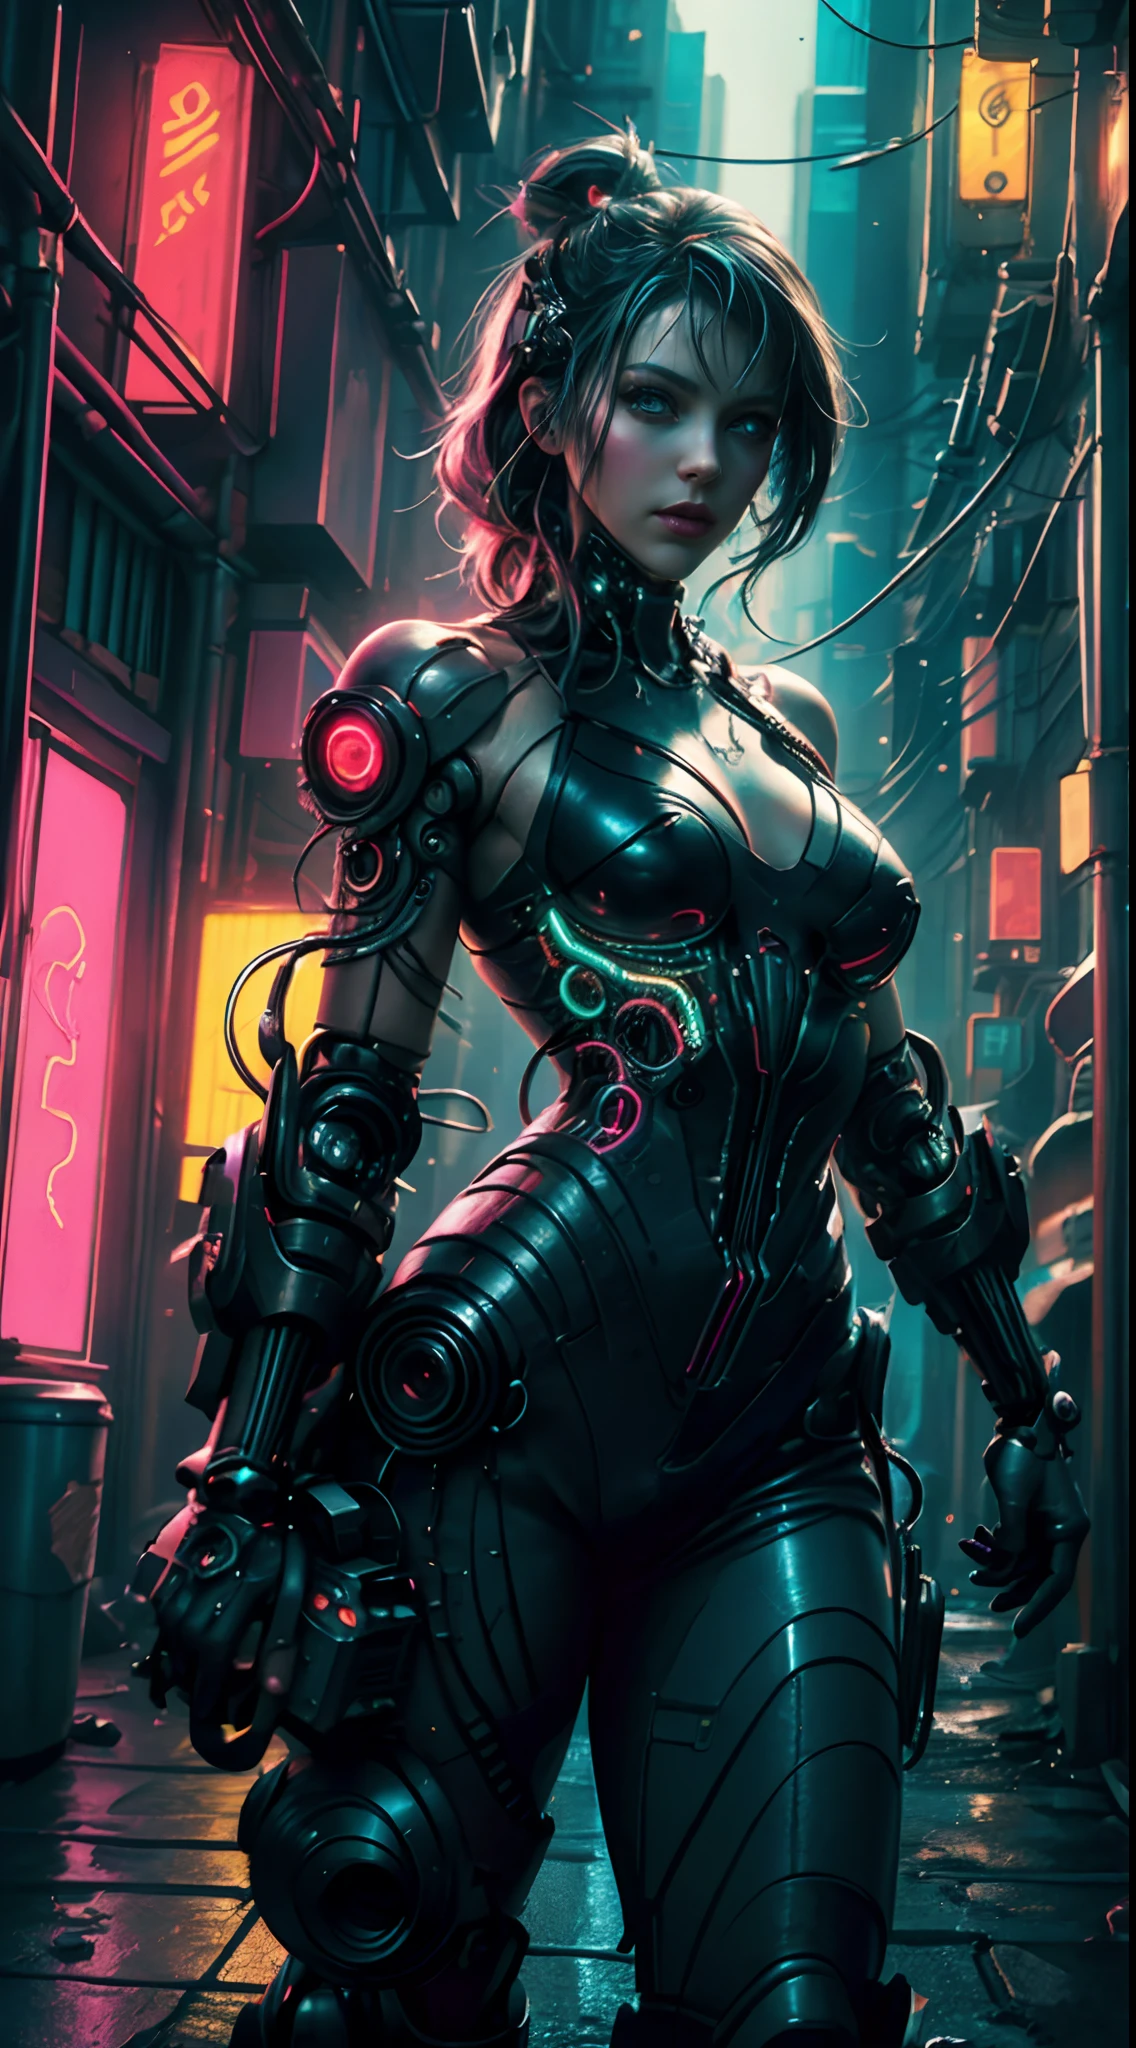 (fotorealistisch:1.4) Pictures of cyberpunk girls, (Top quality, 8K, 32 Tsd., Masutepiece), (Dynamische Pose), ((nach vorne gerichtete Kamera)), (Blick in die Kamera), Cowboy erschossen, Formloses Haar, buntes Haar, Bunte Cyberpunk-Kleidung, Depth of field f/1.8, cyberpunk city hintergrund, Filmische Beleuchtung.14 Jahre 
The cybernetic enhancements you possess are not just for show - they are your lifeline in this dangerous world. With your enhanced strength, speed, and agility, you must navigate through the city's dark underbelly and confront its most dangerous criminals. Will you survive, or will you become just another victim of the cyberpunk neon world? Girl Hair with neon colors Highlights with bright colors